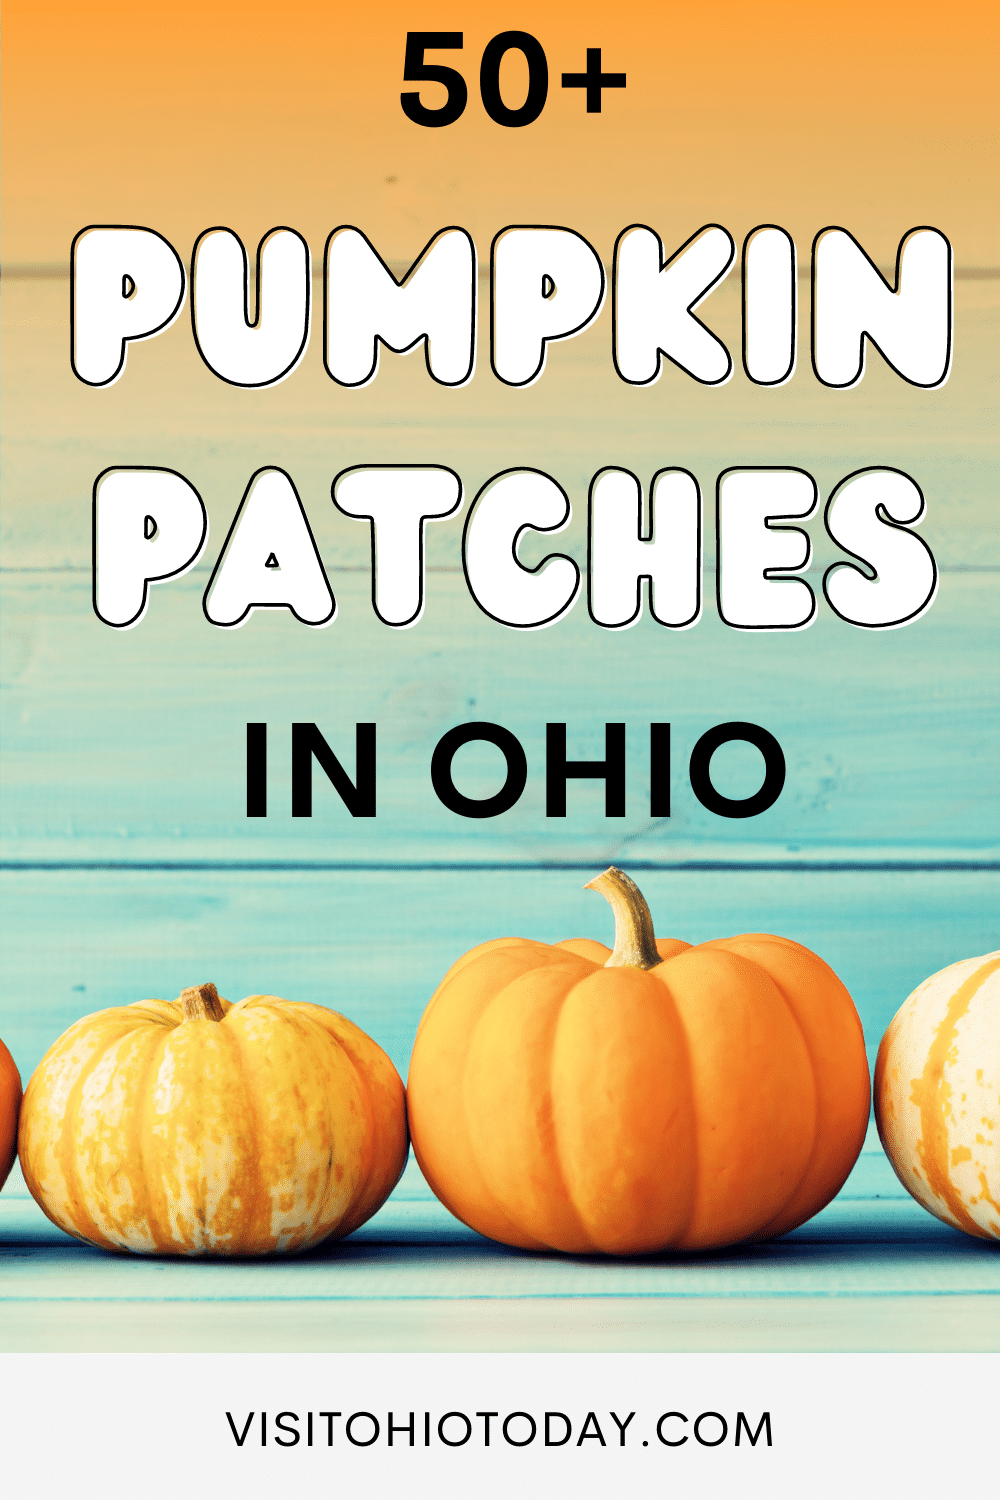 teal and orange back ground with 2 orange pumpkins at bottom. Text overlay says 50+ pumpkin patches in Ohio